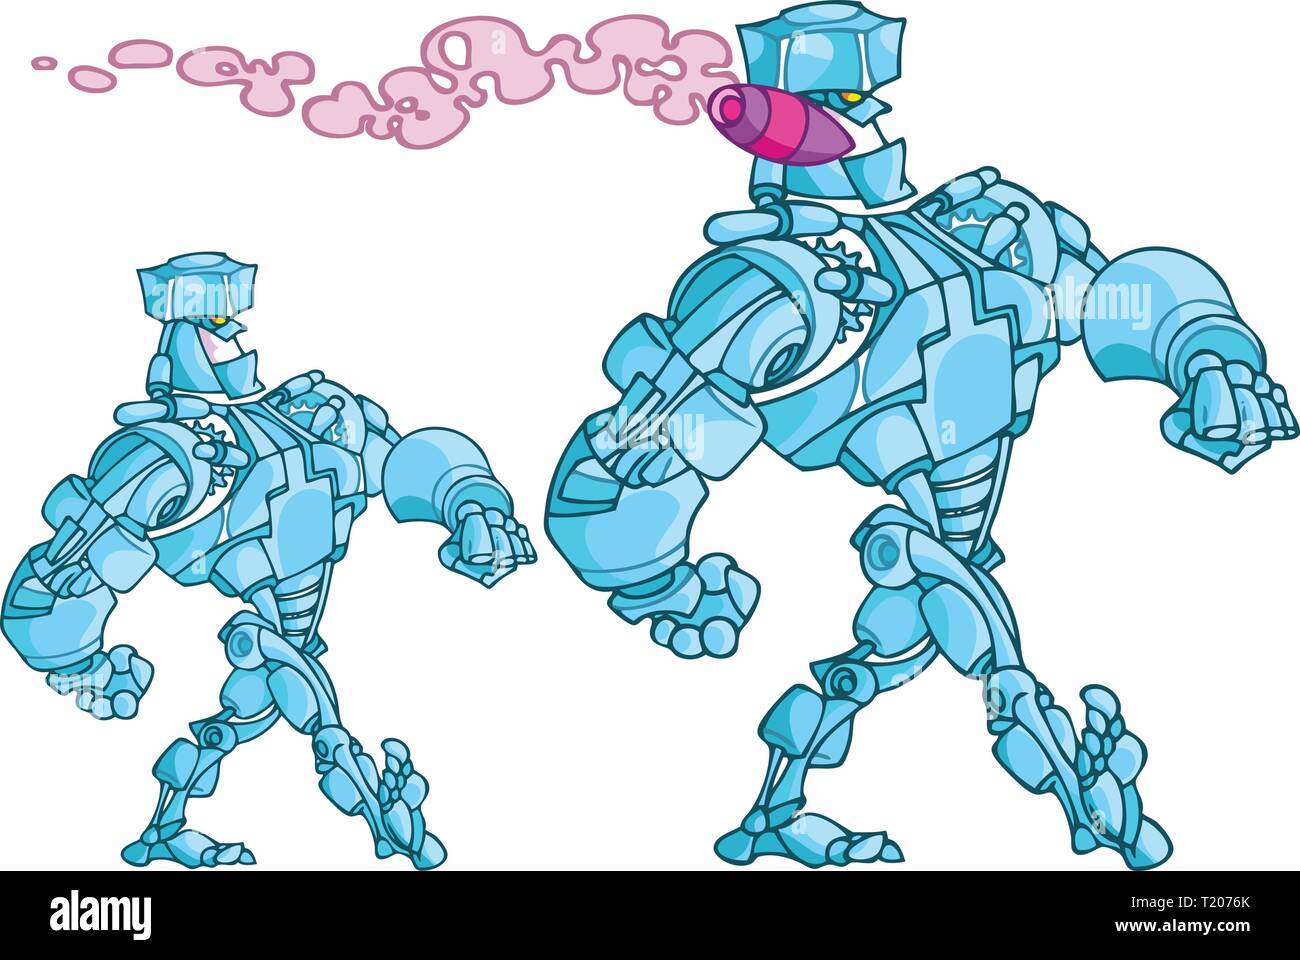 The Illustration shows walking humanoid robot smoking cigar, done in cartoon style. Stock Vector